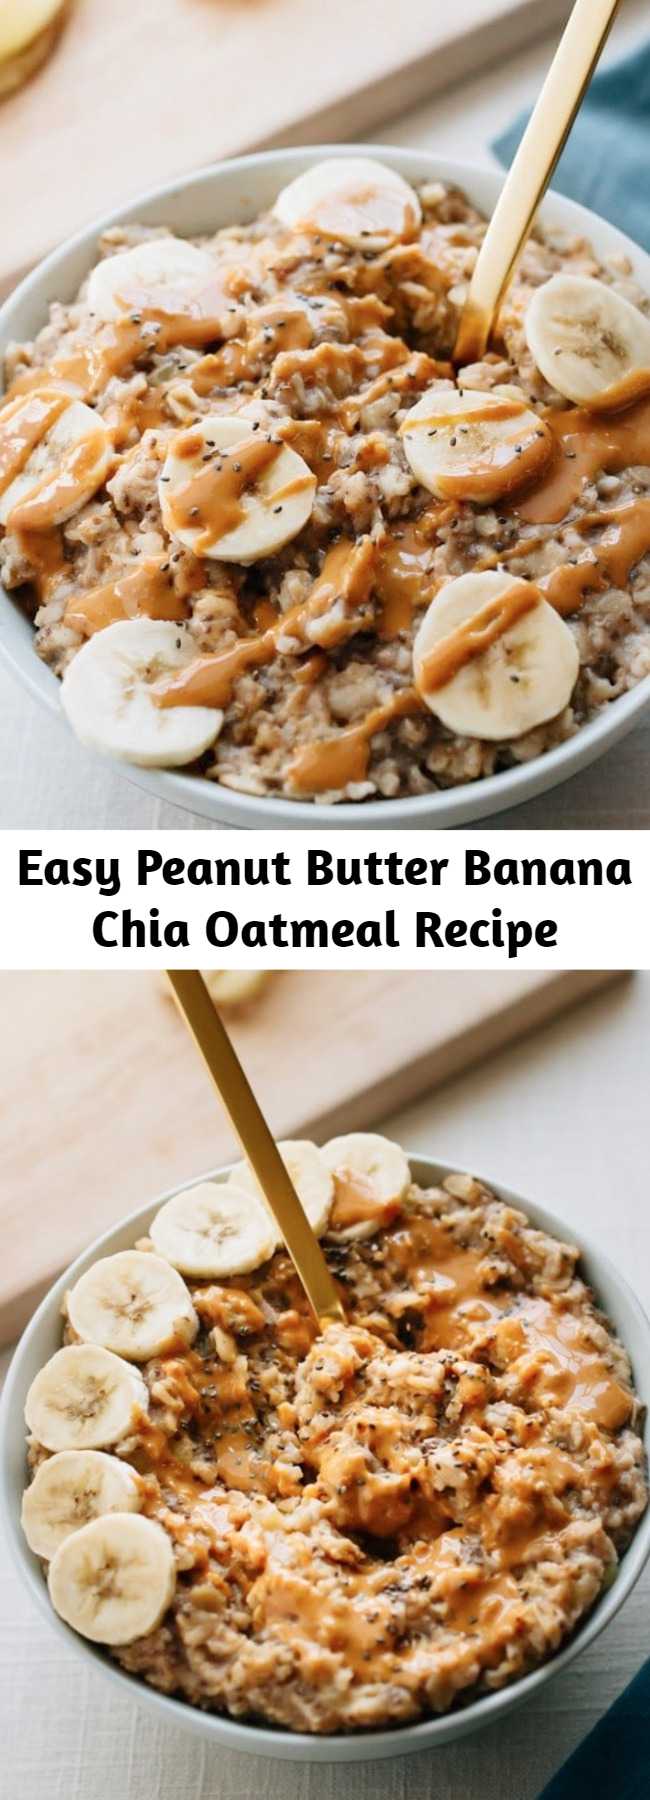 Easy Peanut Butter Banana Chia Oatmeal Recipe - The ultimate healthy breakfast recipe, this peanut butter banana oatmeal is creamy, voluminous and will keep you full all morning long! Plus it only takes about 10 minutes to make. Each bowl has around 370 calories, 17 grams of fiber (woot!), and 11 grams of protein.